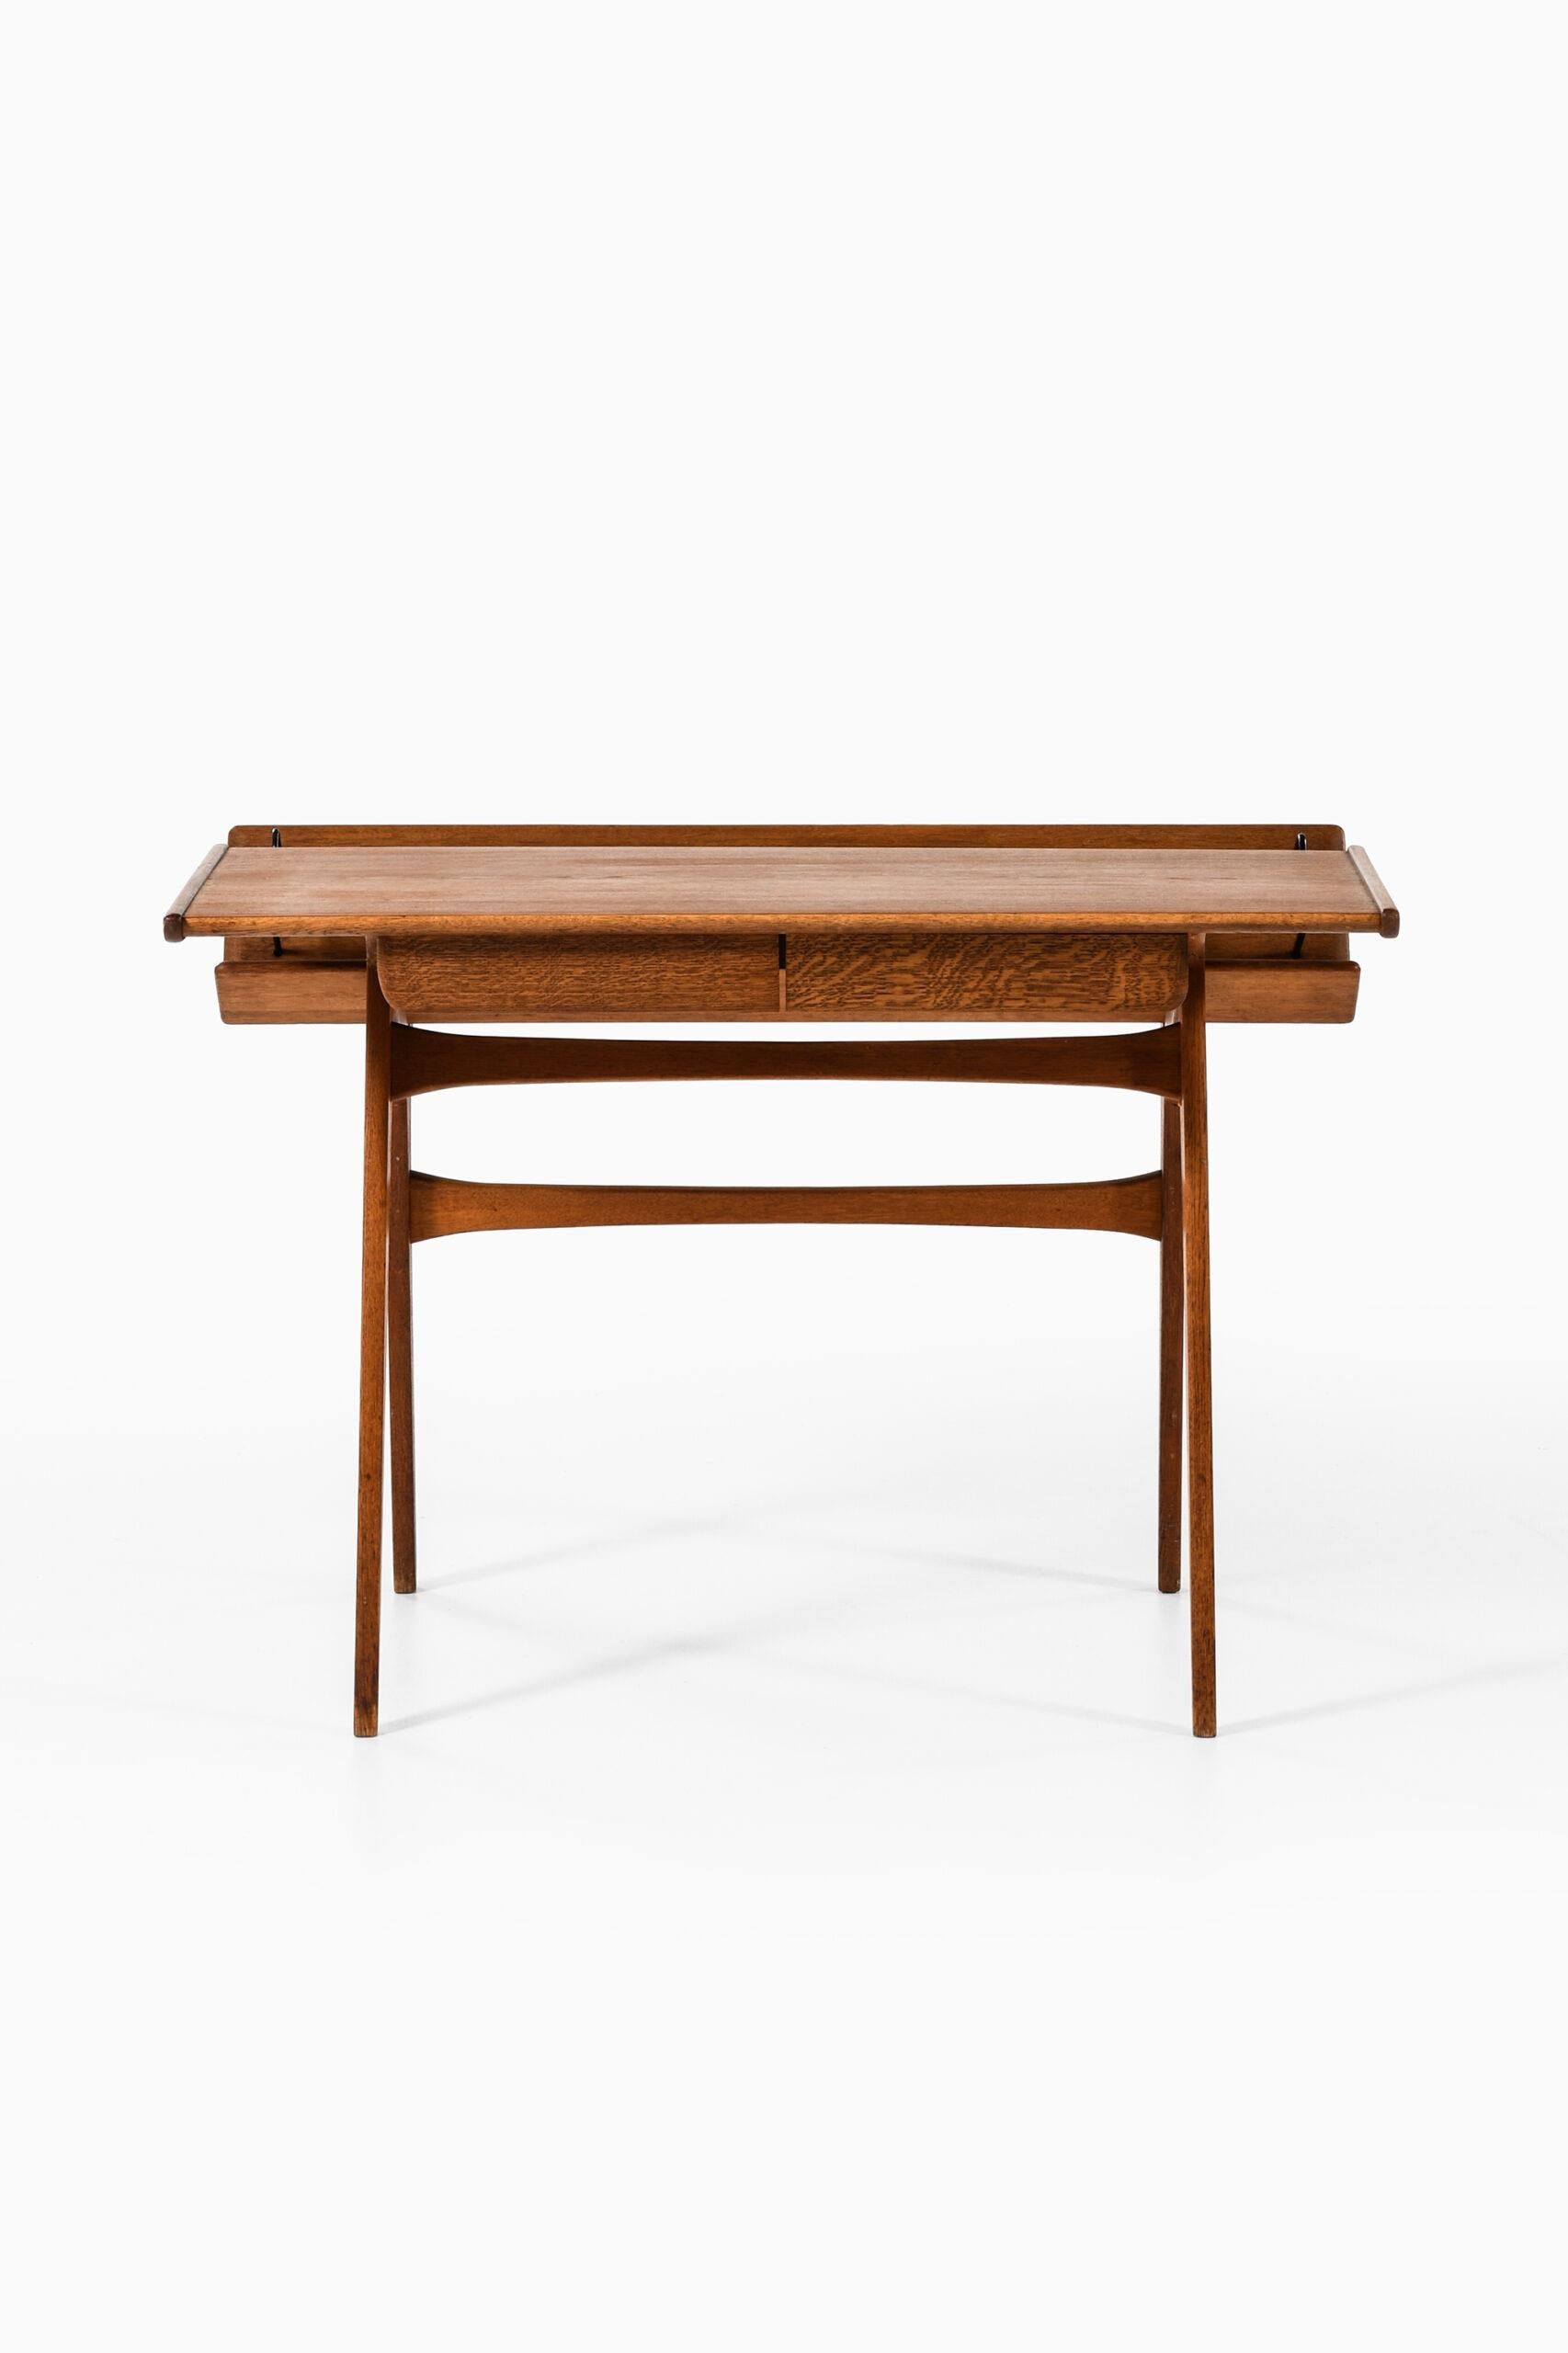 Rare desk by unknown designer. Produced in Germany.